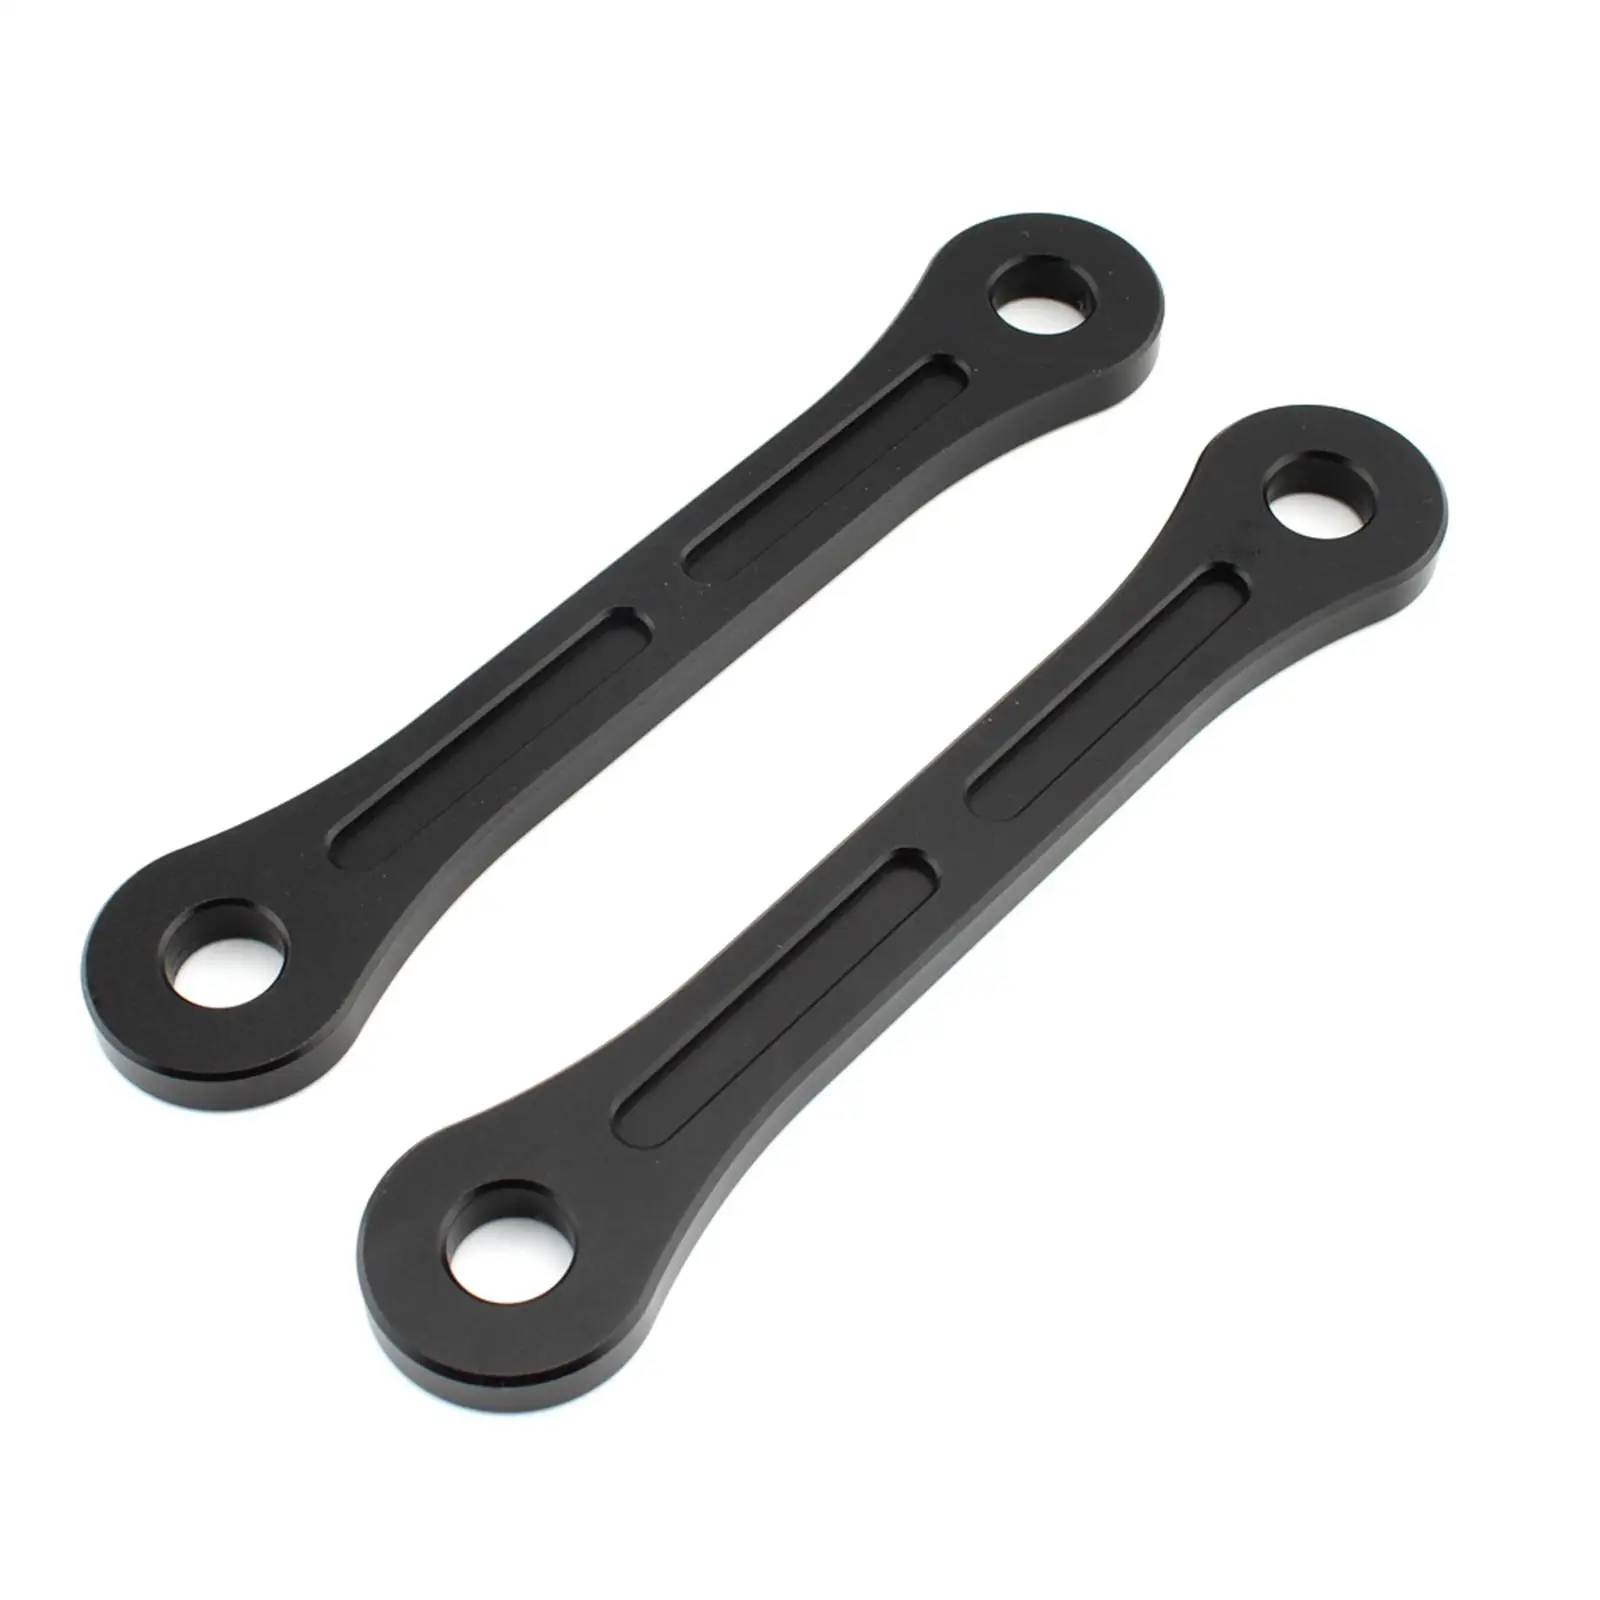 2 Pieces Motorcycle Lowering Link 35mm Lowering Kit for Suzuki GSX1300R